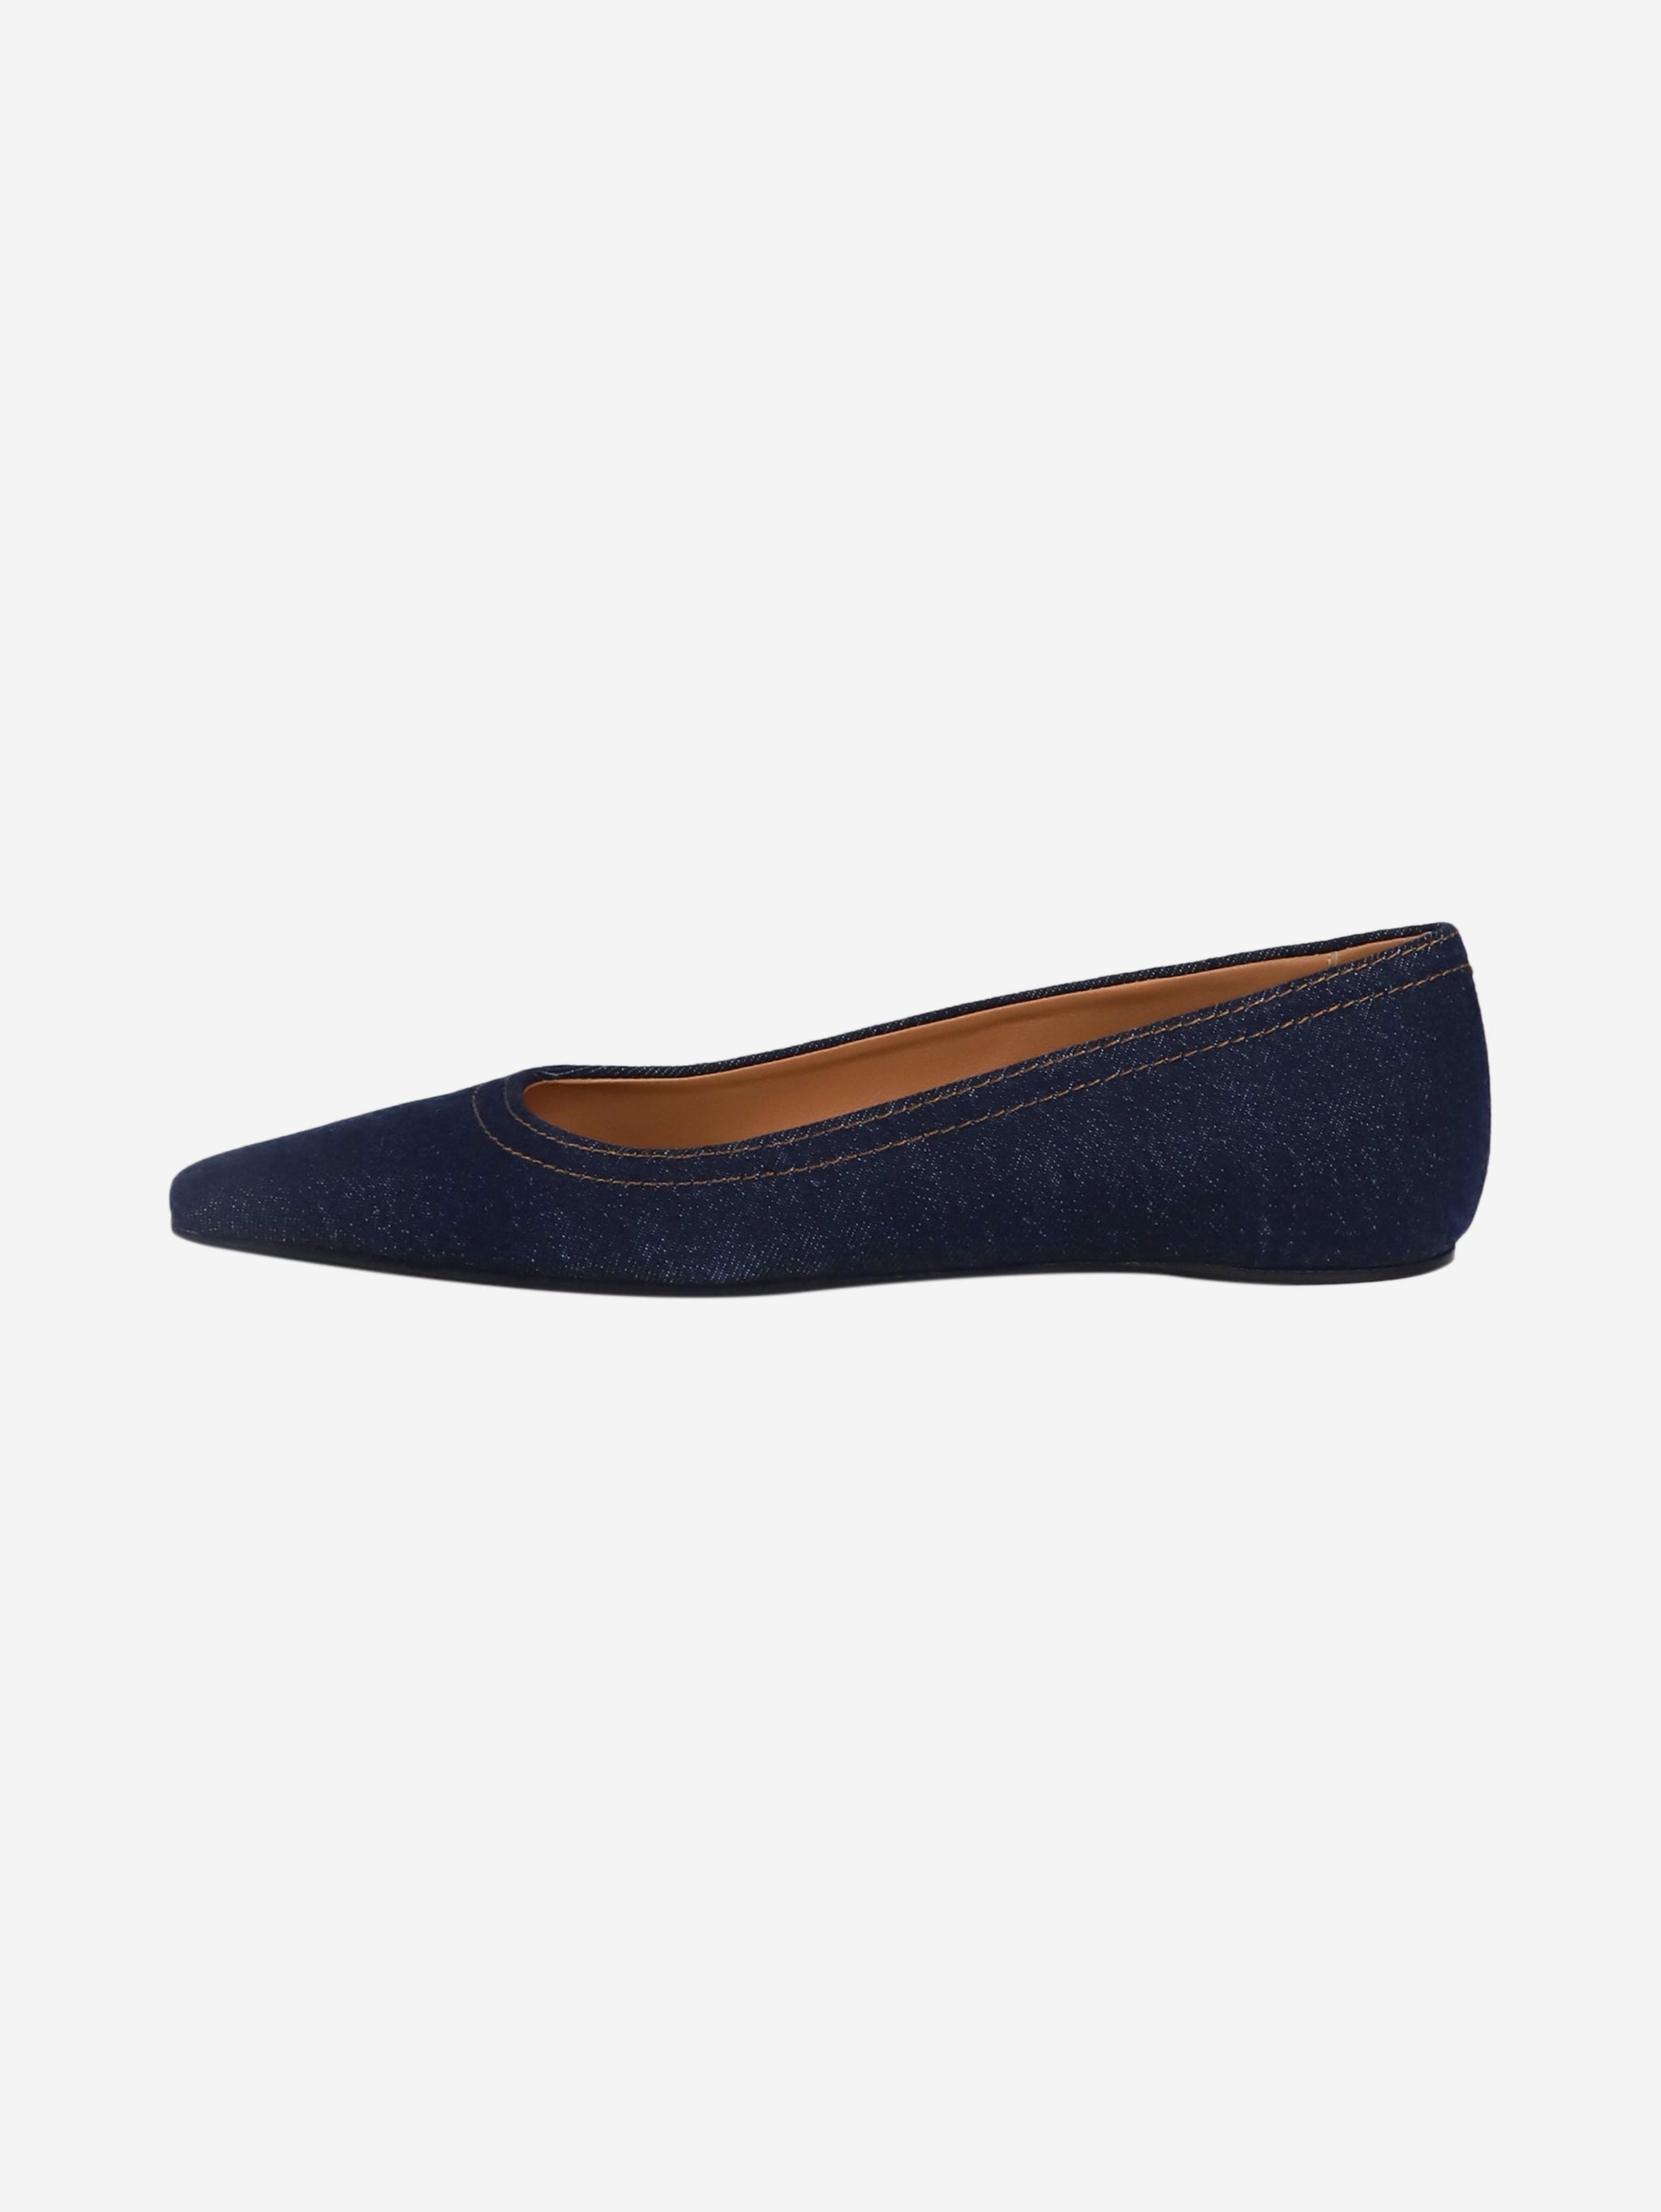 Toteme pre-owned blue denim ballet flats - size EU 39 | Sign of the Times